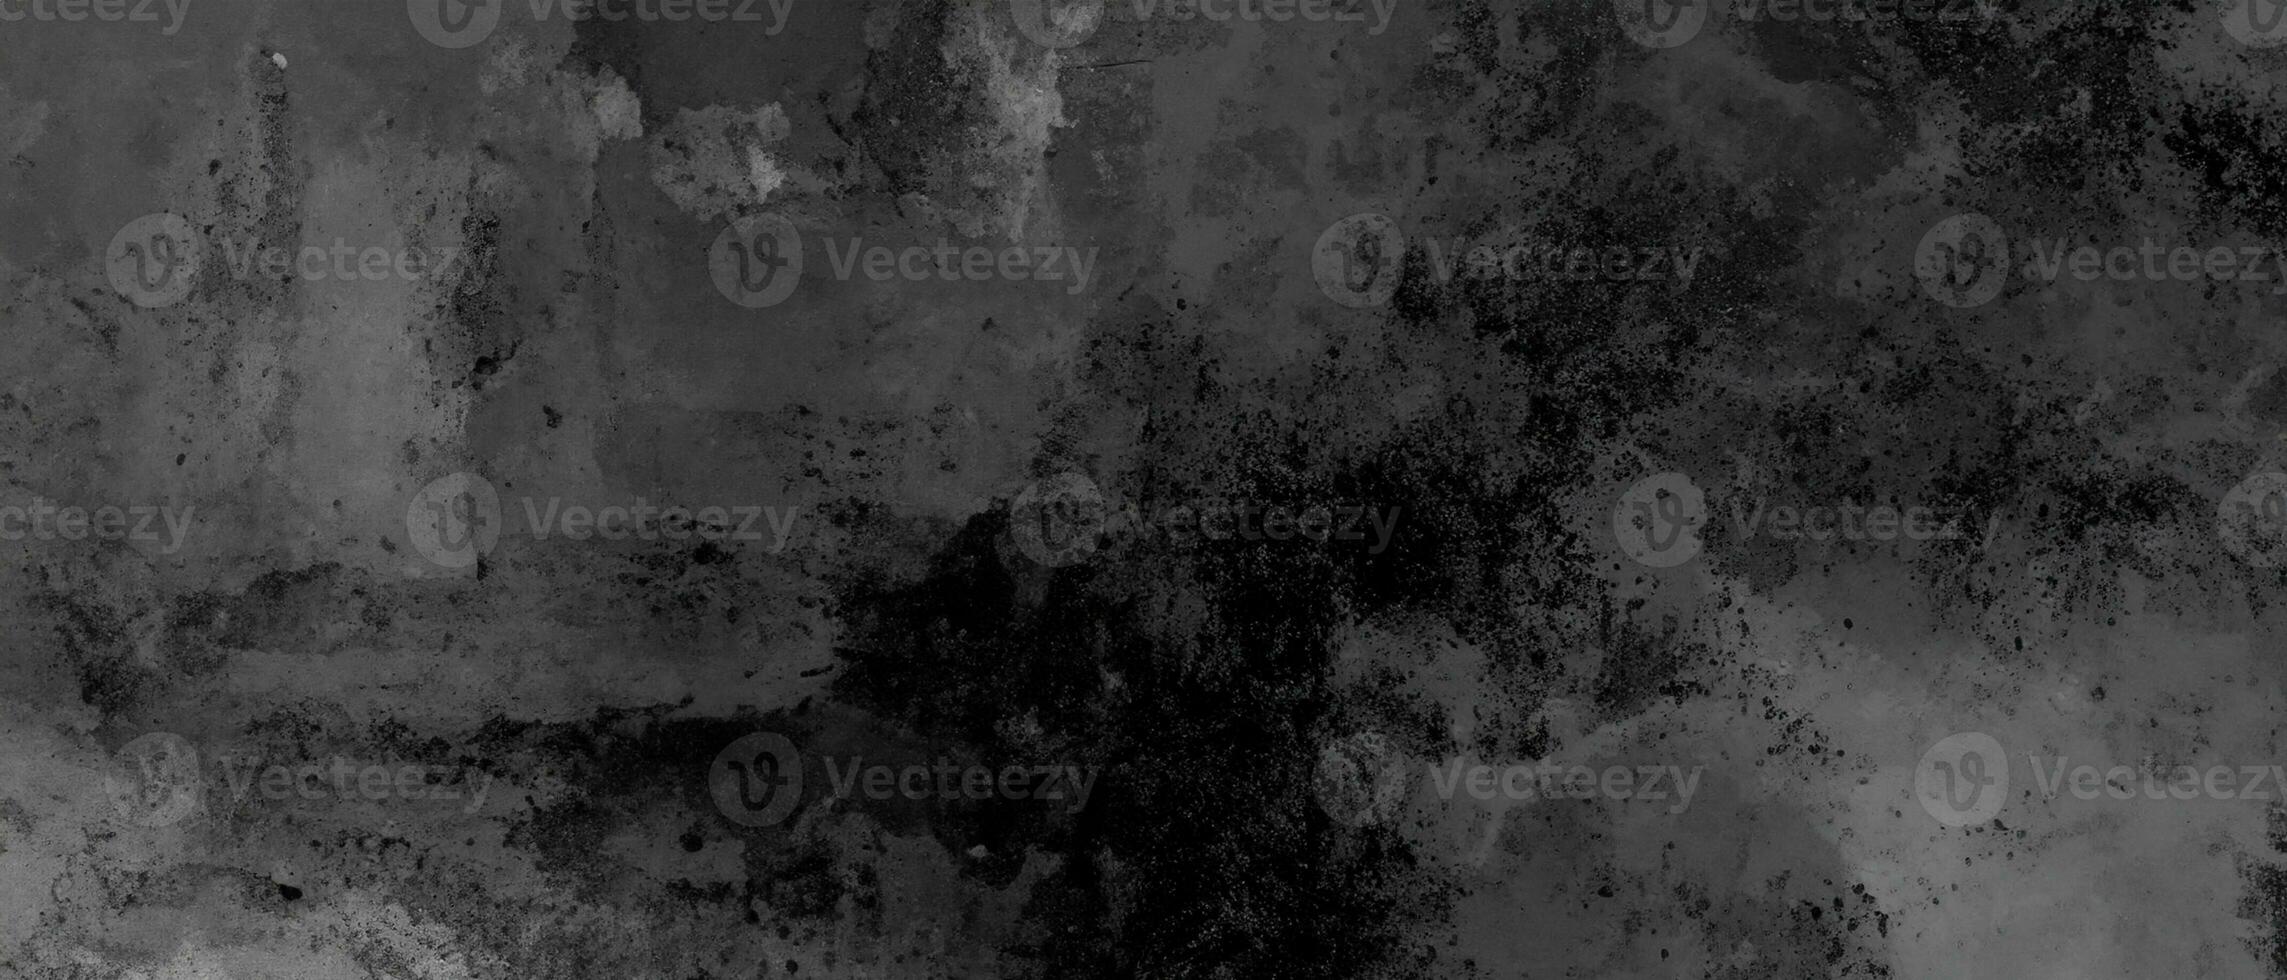 Black background, chalkboard texture for website backgrounds, old vintage splashed watercolor painted paper or textured antique wall with distressed mottled grunge photo